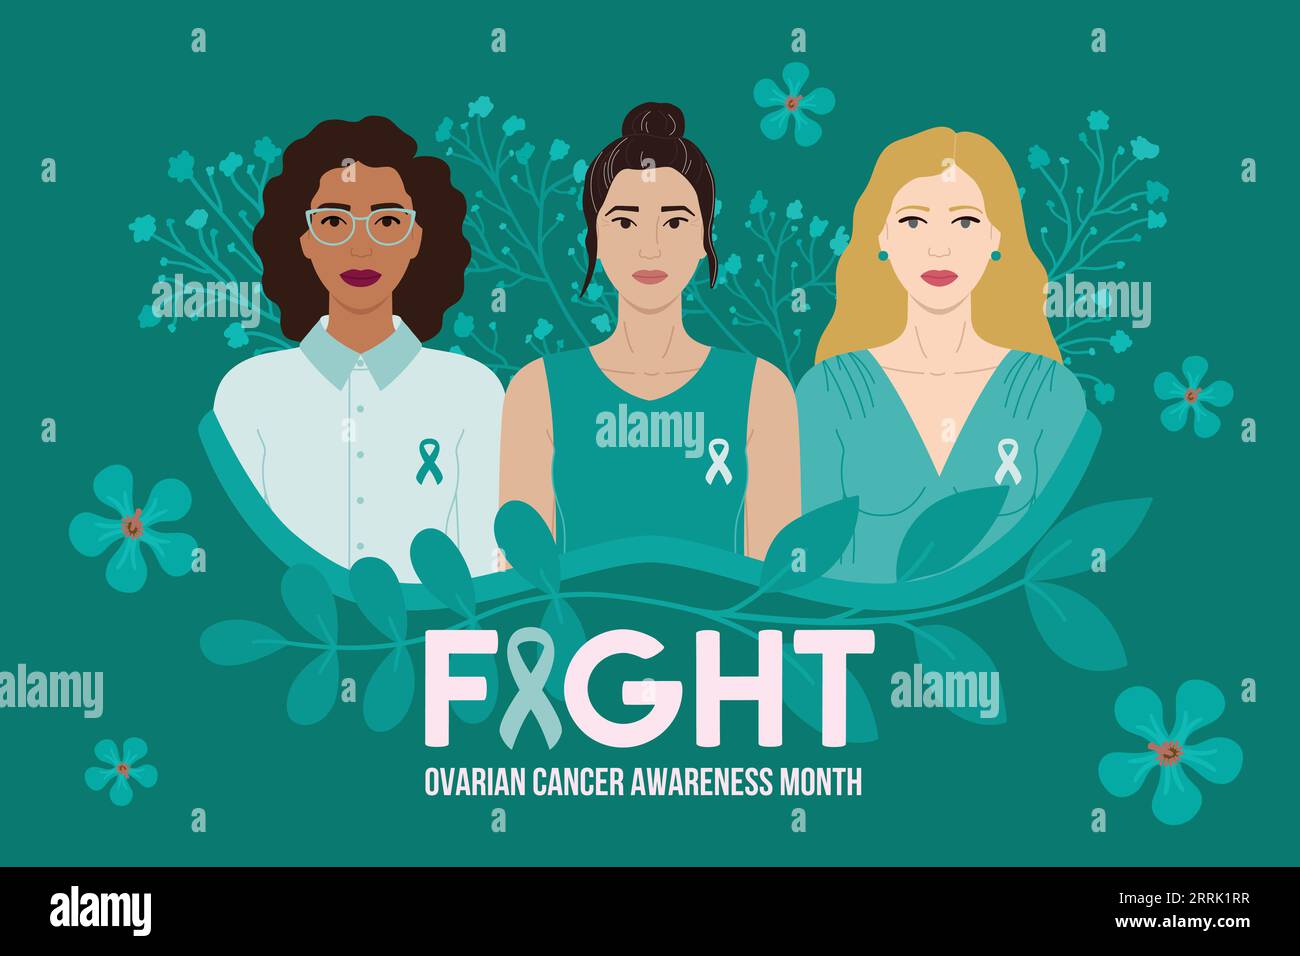 Ovarian Cancer Awareness Month. Fight phrase. 3 diverse women with flowers and teal ribbons stand together against cancer. Cancer prevention, women he Stock Vector